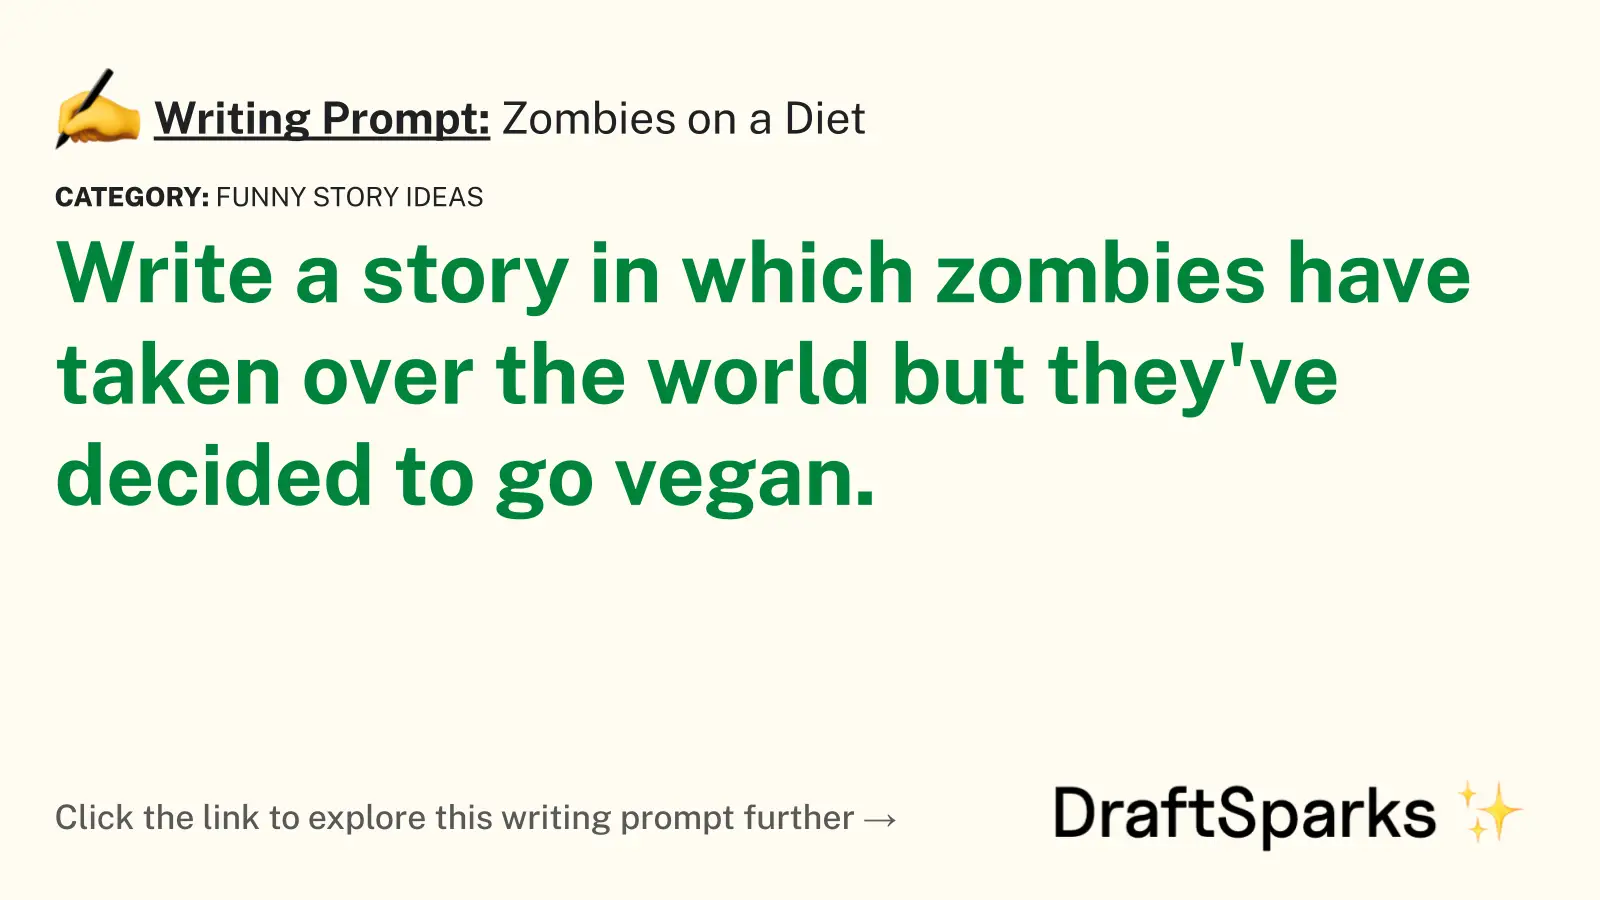 Zombies on a Diet